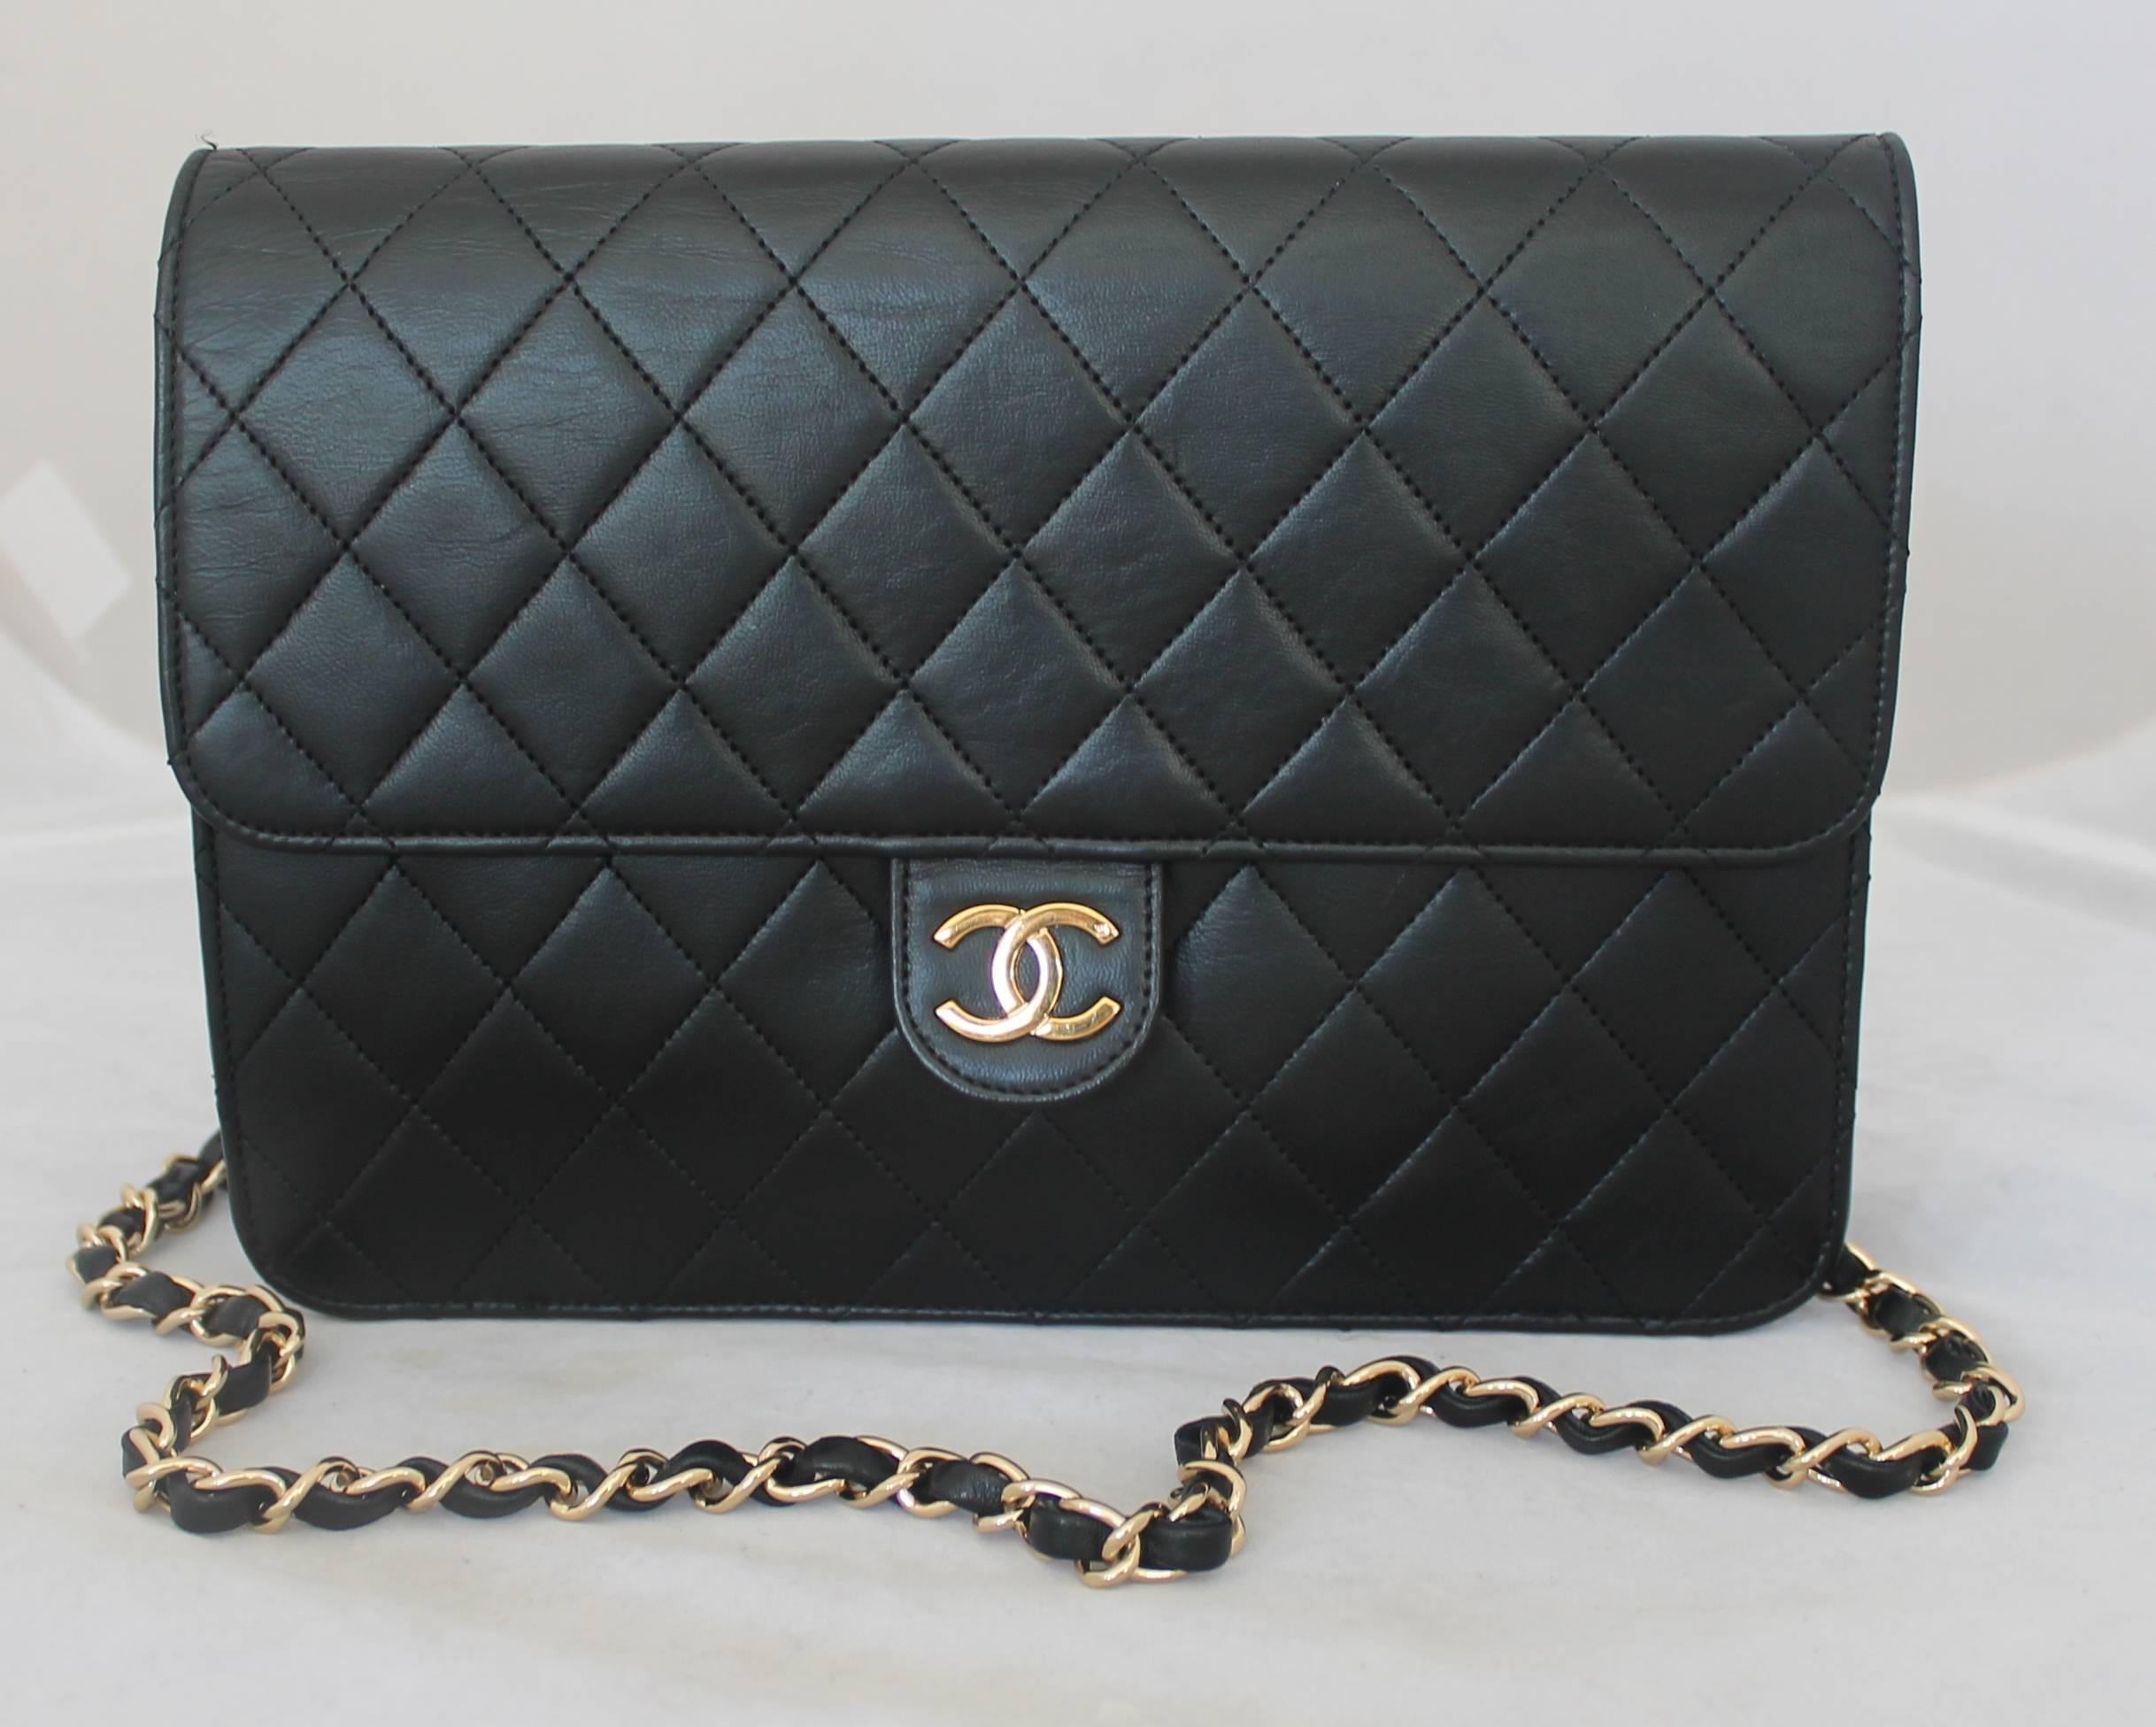 Chanel Black Quilted Lambskin Classic Single Flap Handbag - GHW - Circa Early 1980's.  This beautiful classic Chanel is in very good vintage condition with only some wear in the inside pocket.  It features the signature black quilted lambskin, a